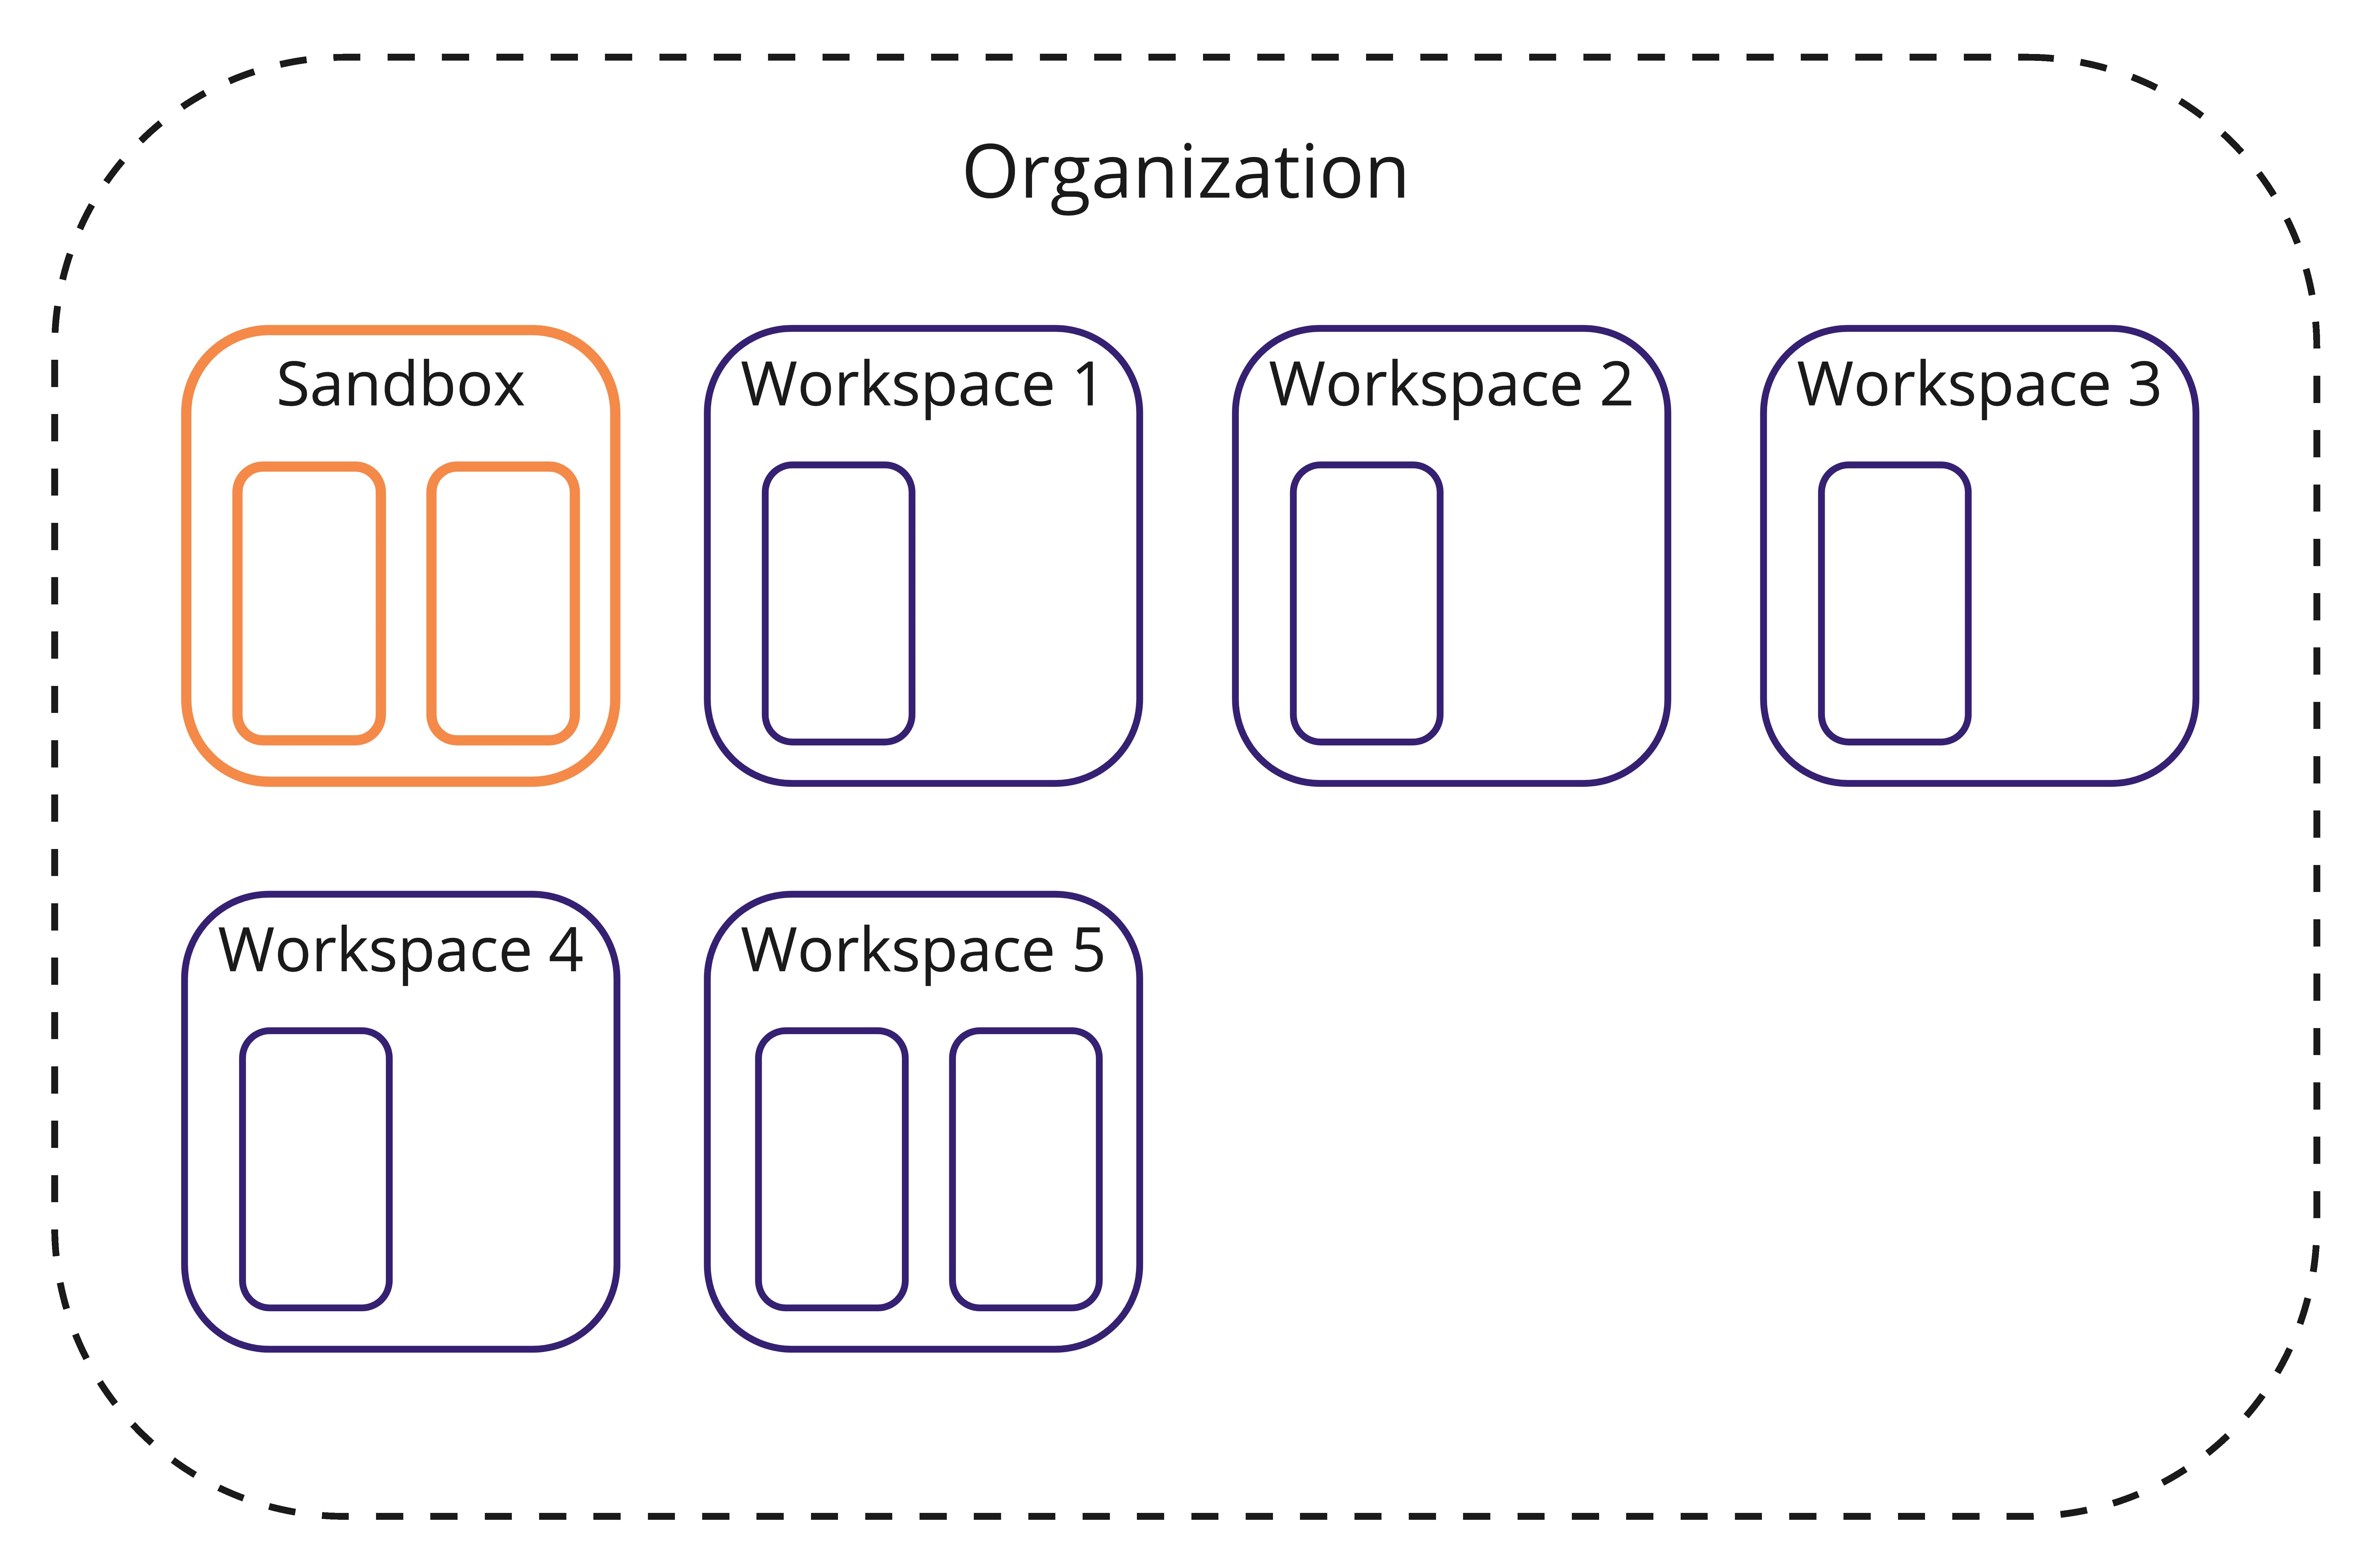 Diagram showing that an administrator can view all projects and workspaces in a Label Studio instance.